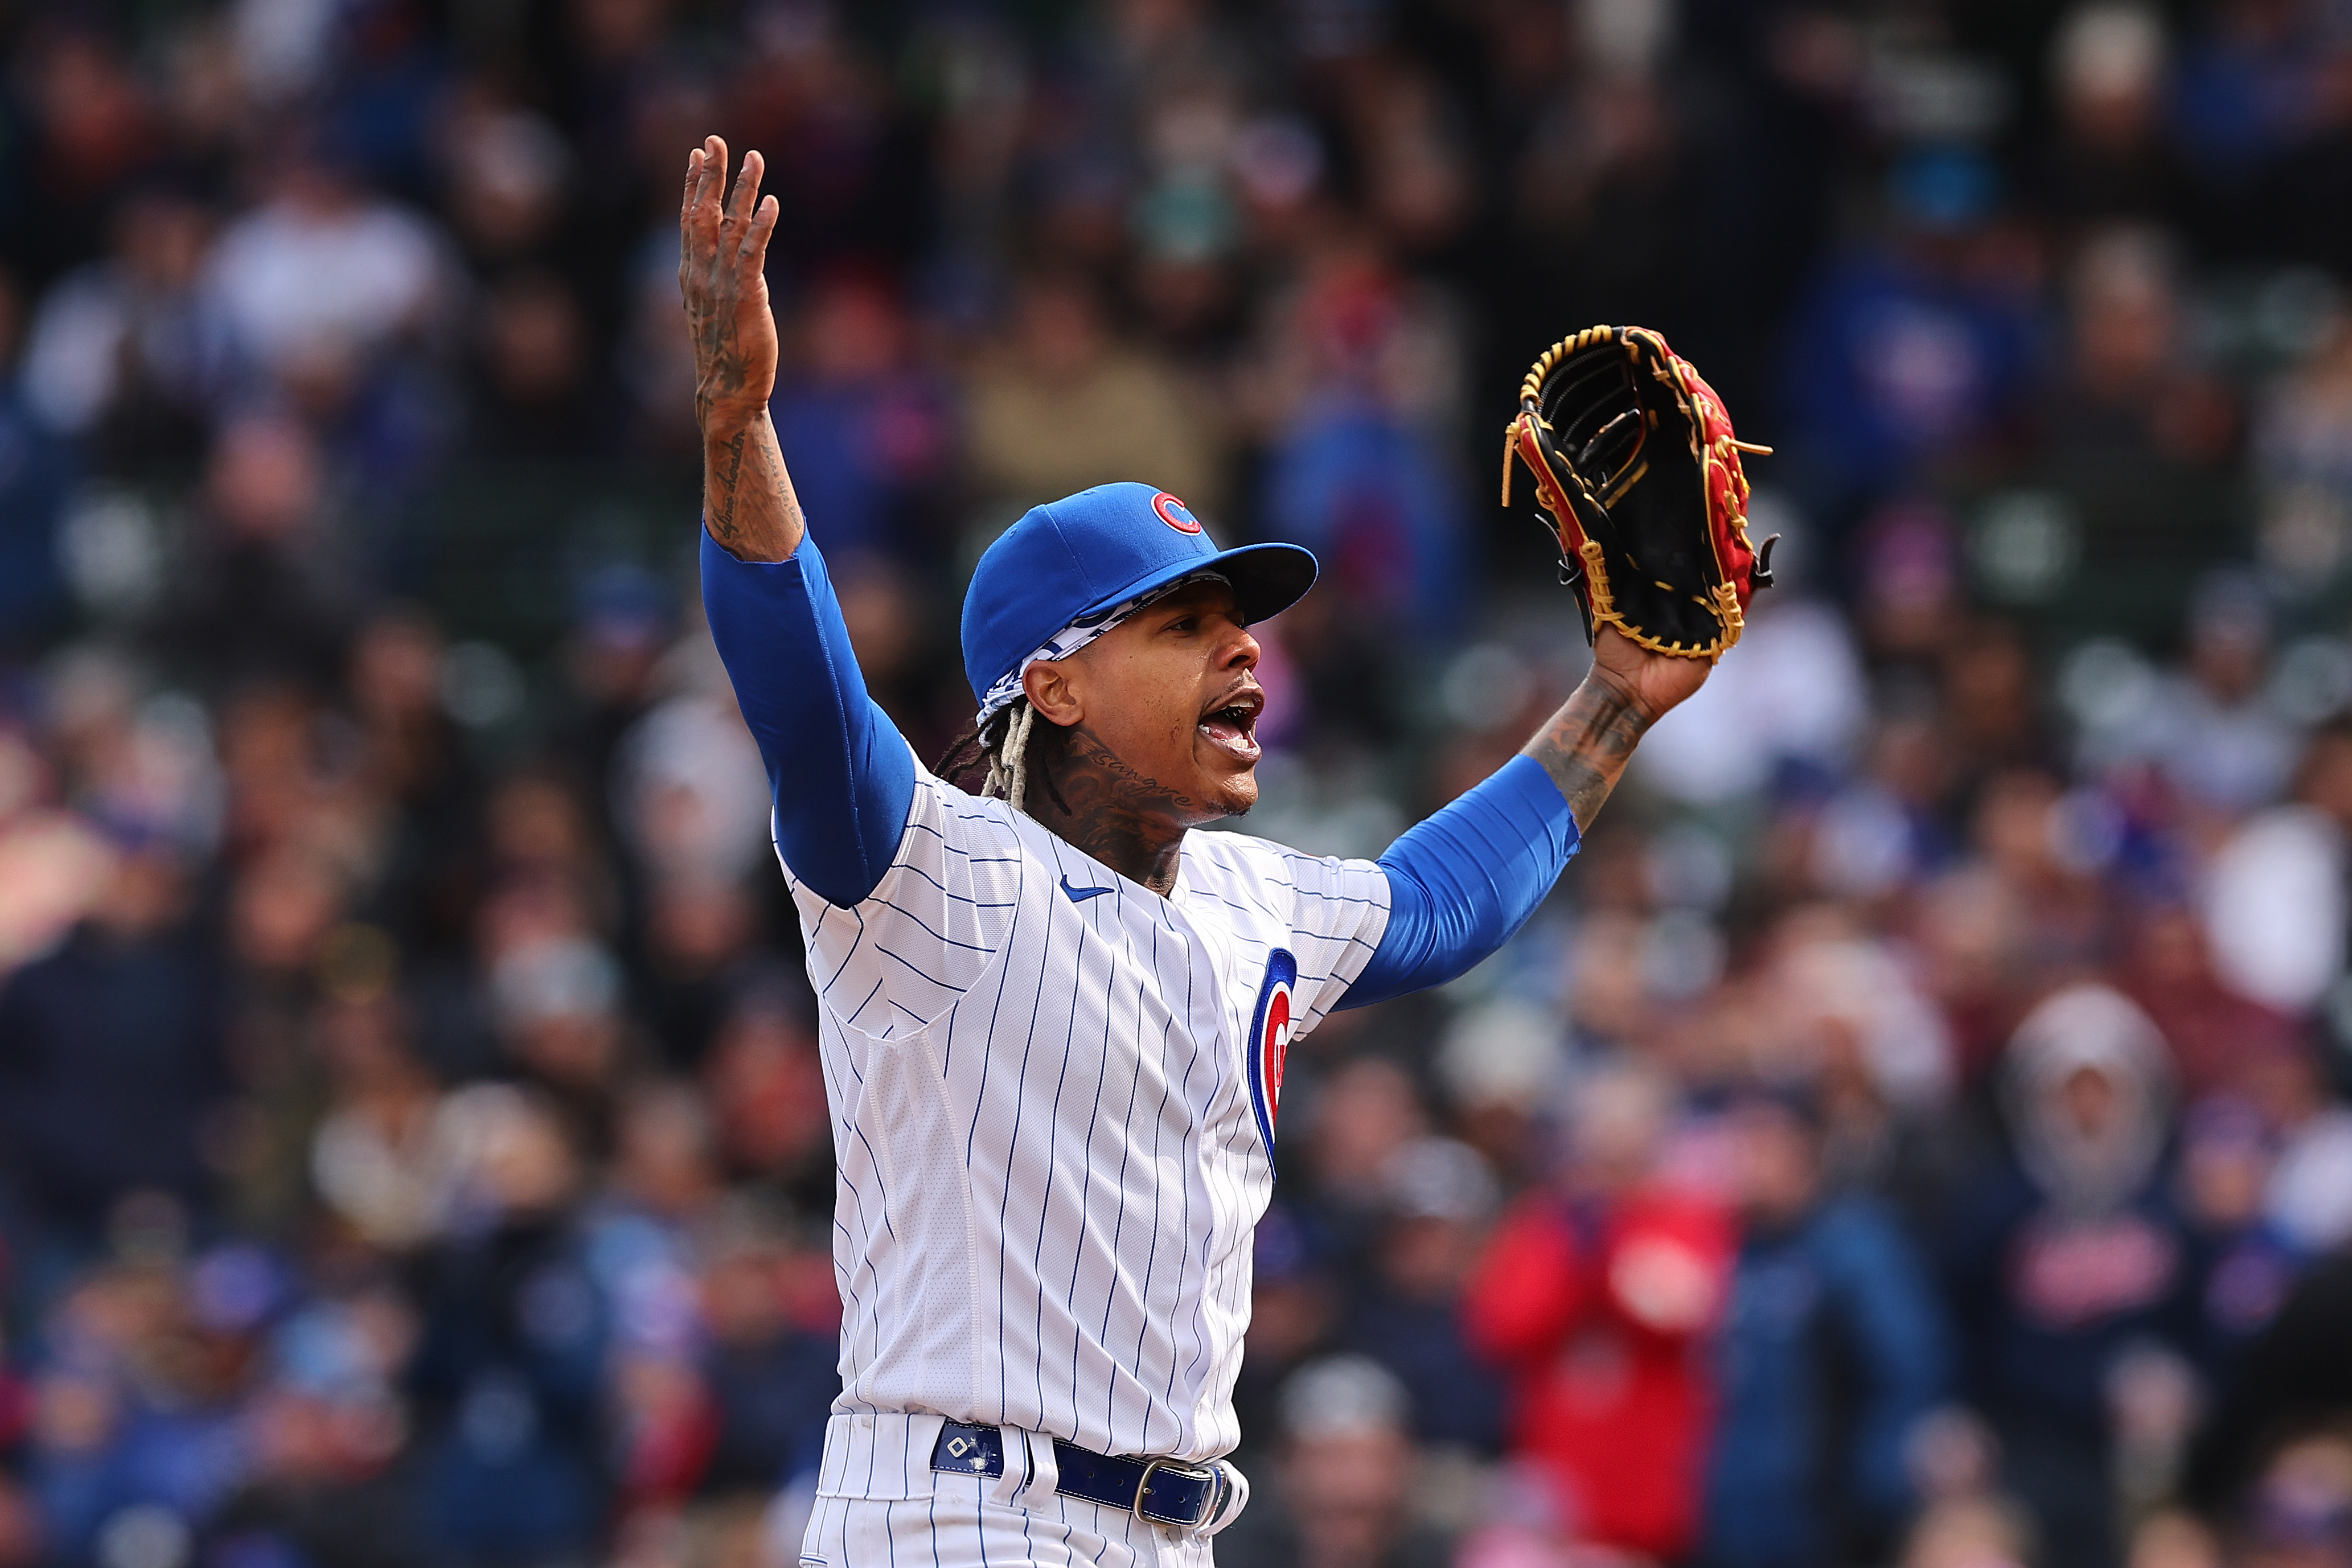 Milwaukee Brewers vs. Chicago Cubs on Opening Day at Wrigley Field